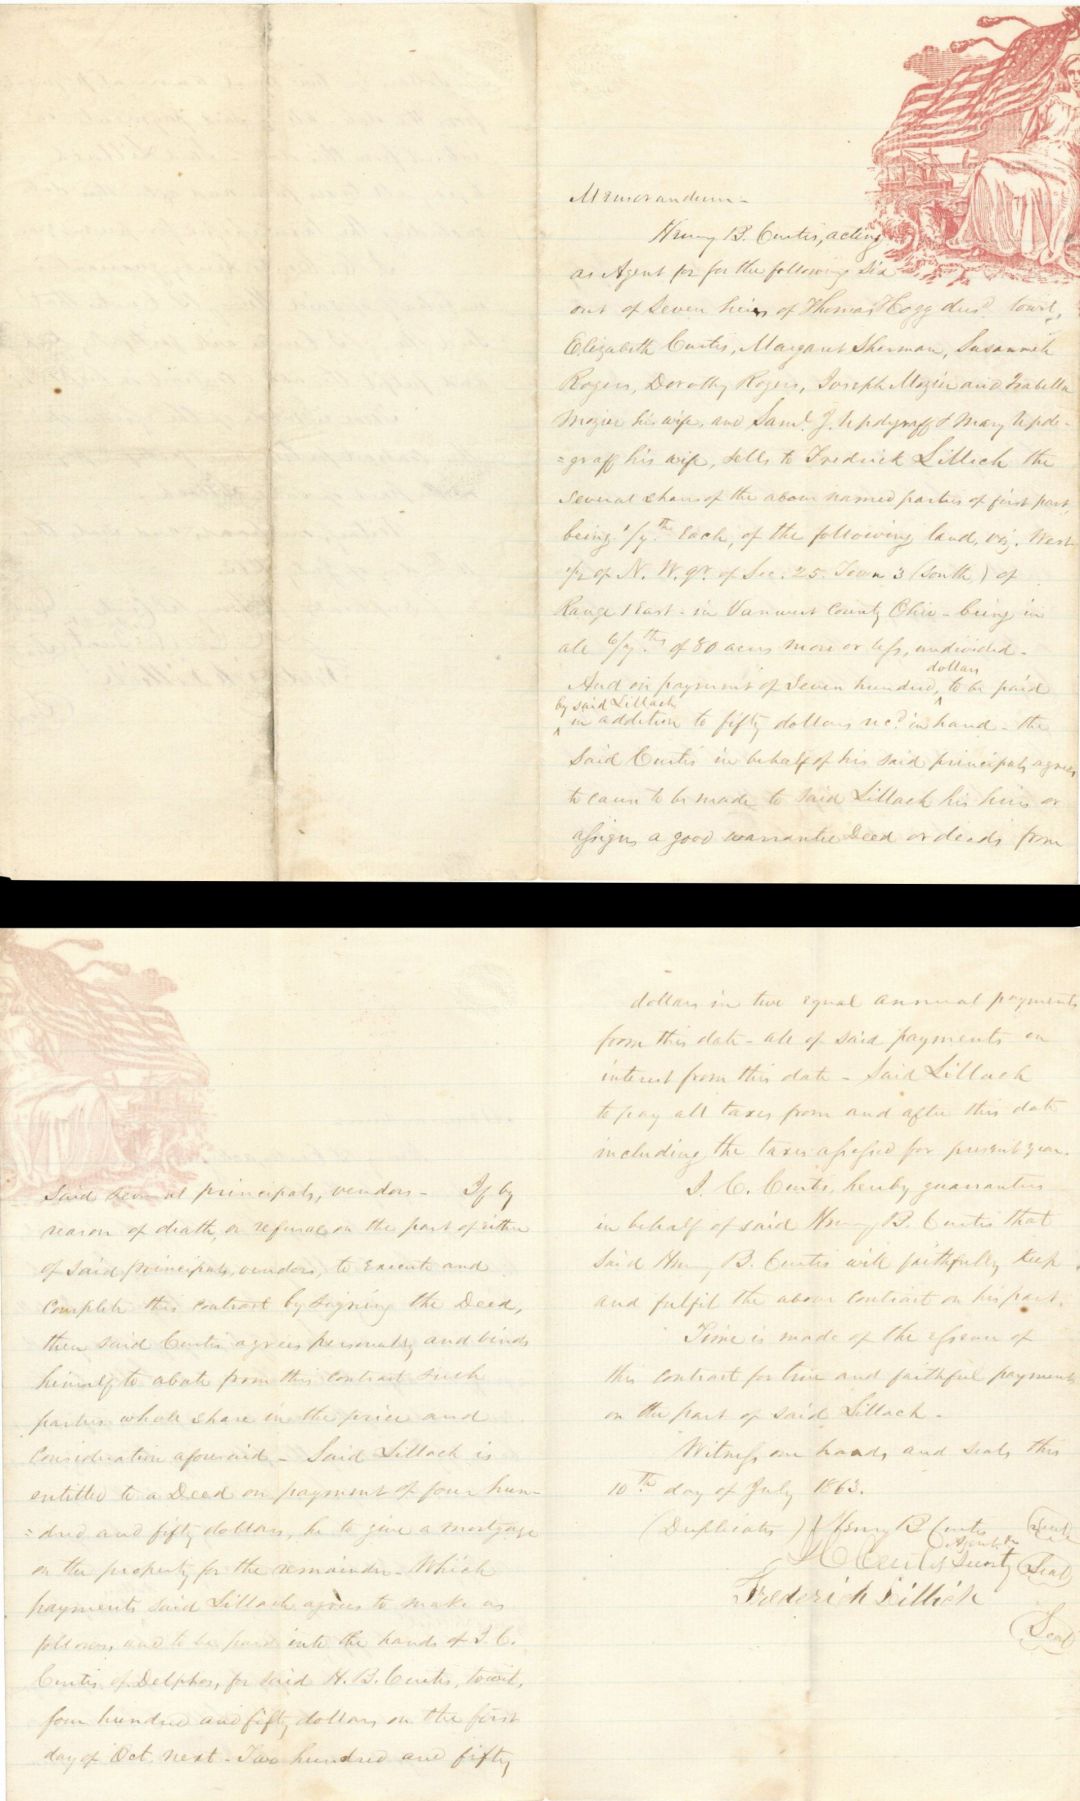 Civil War Letter Related to Will - Civil War Documents